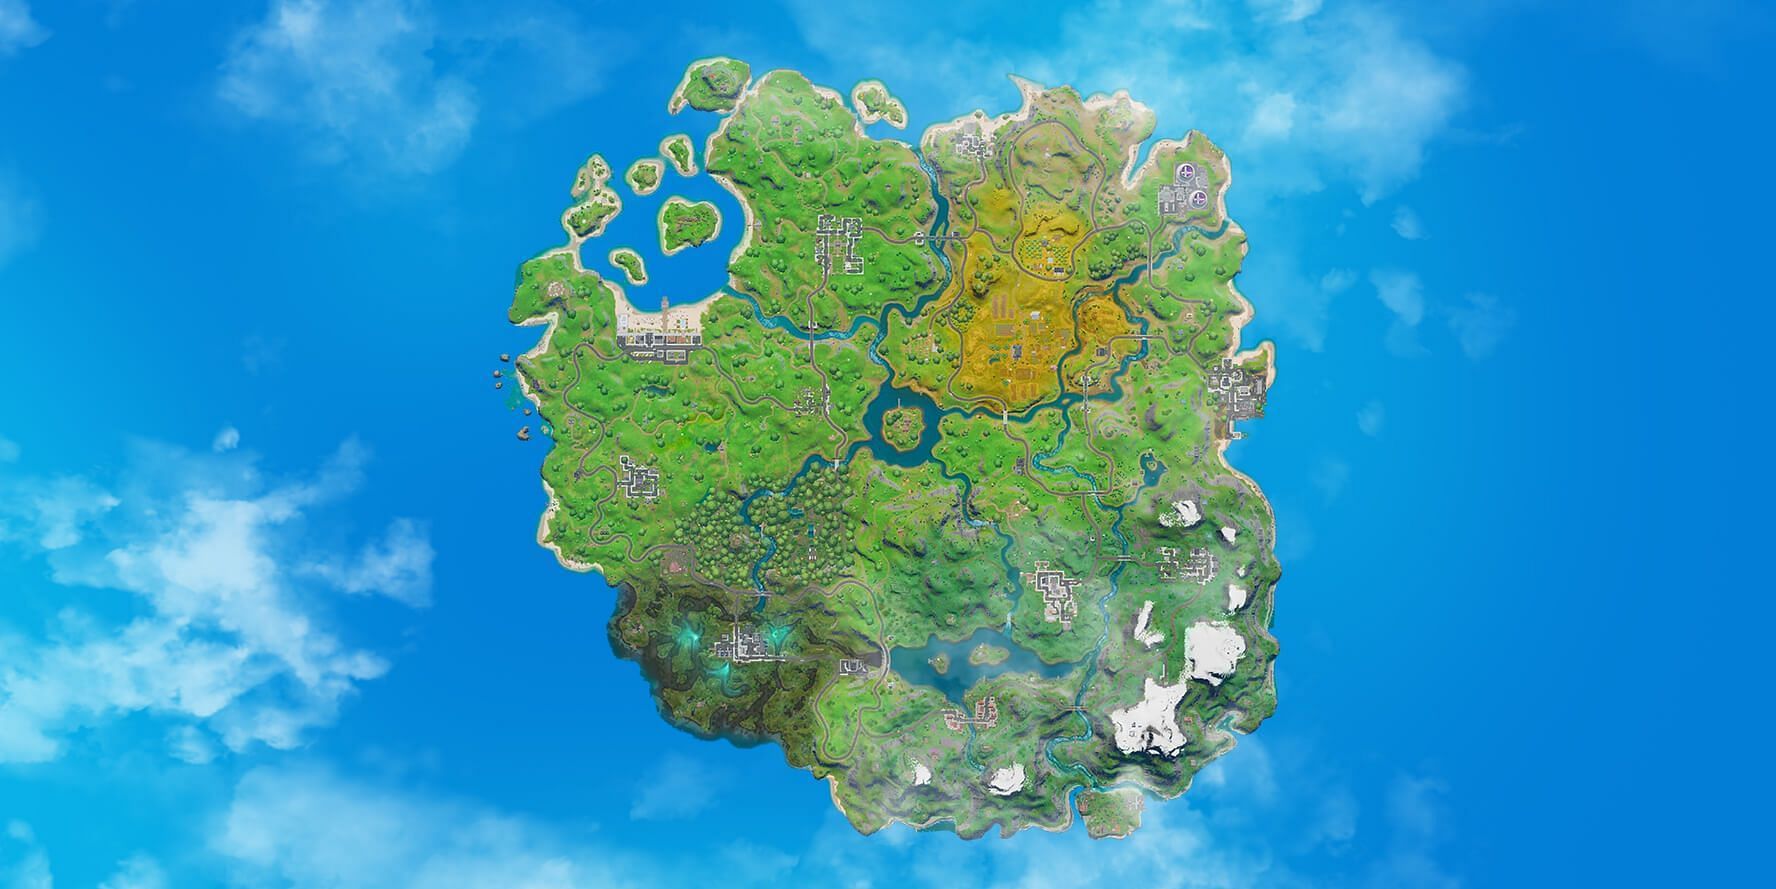 A Fortnite fan has created several Fortnite maps out of clay and painted them to look like the original ones in the game (Image via Epic Games)